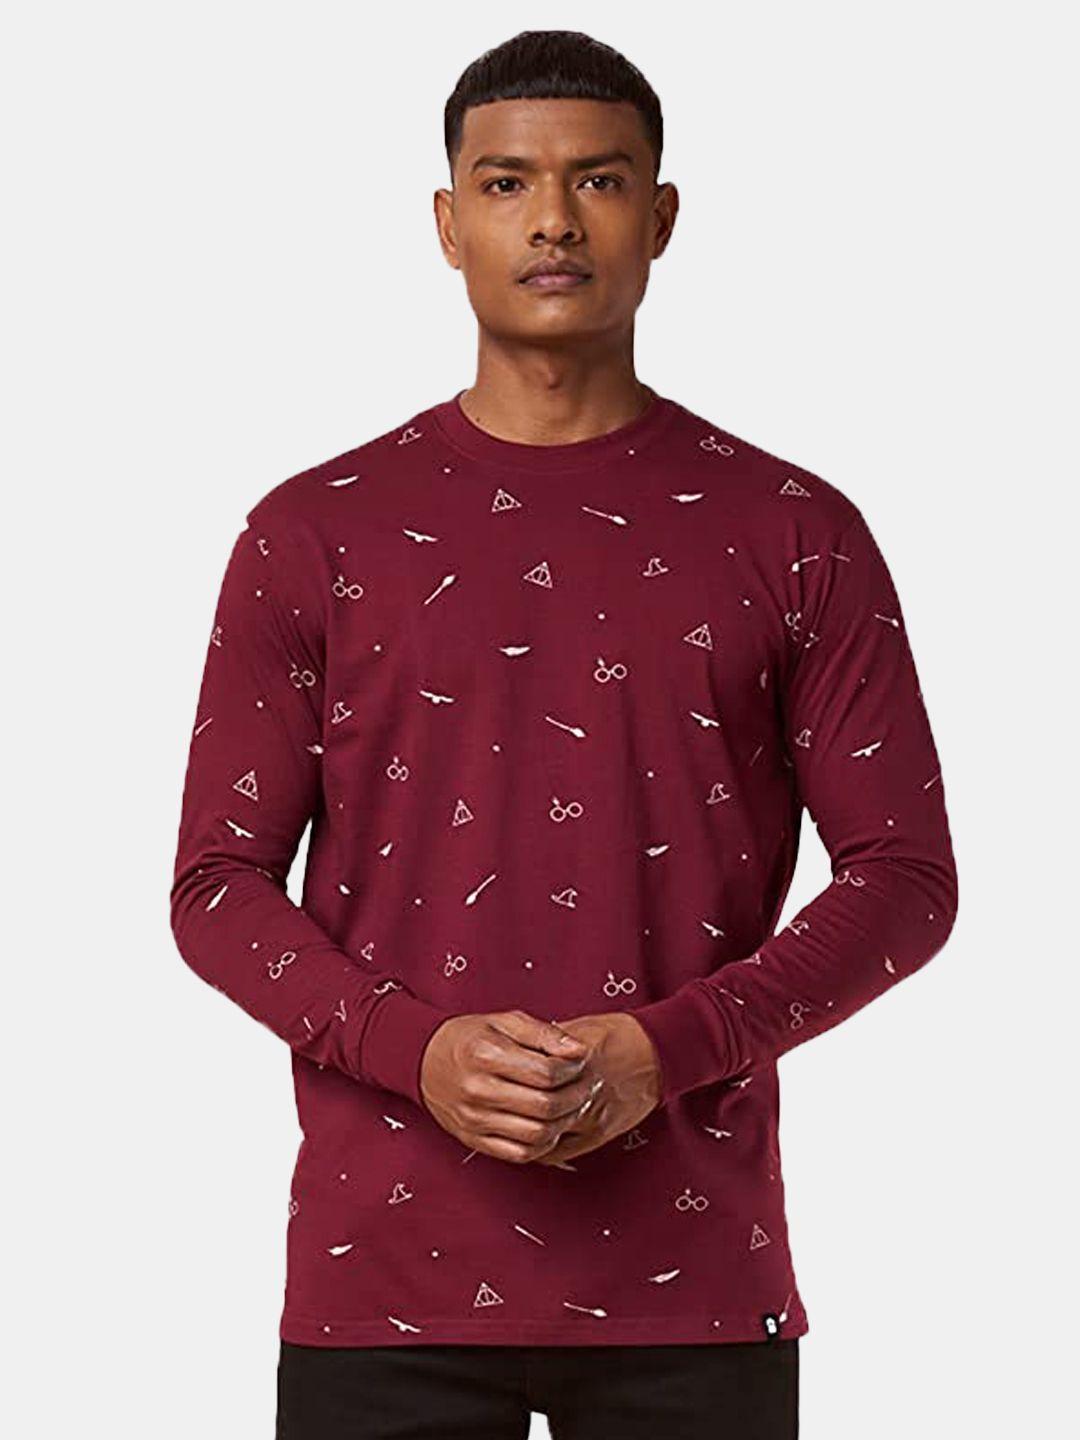 the souled store men maroon & white cotton printed t-shirt